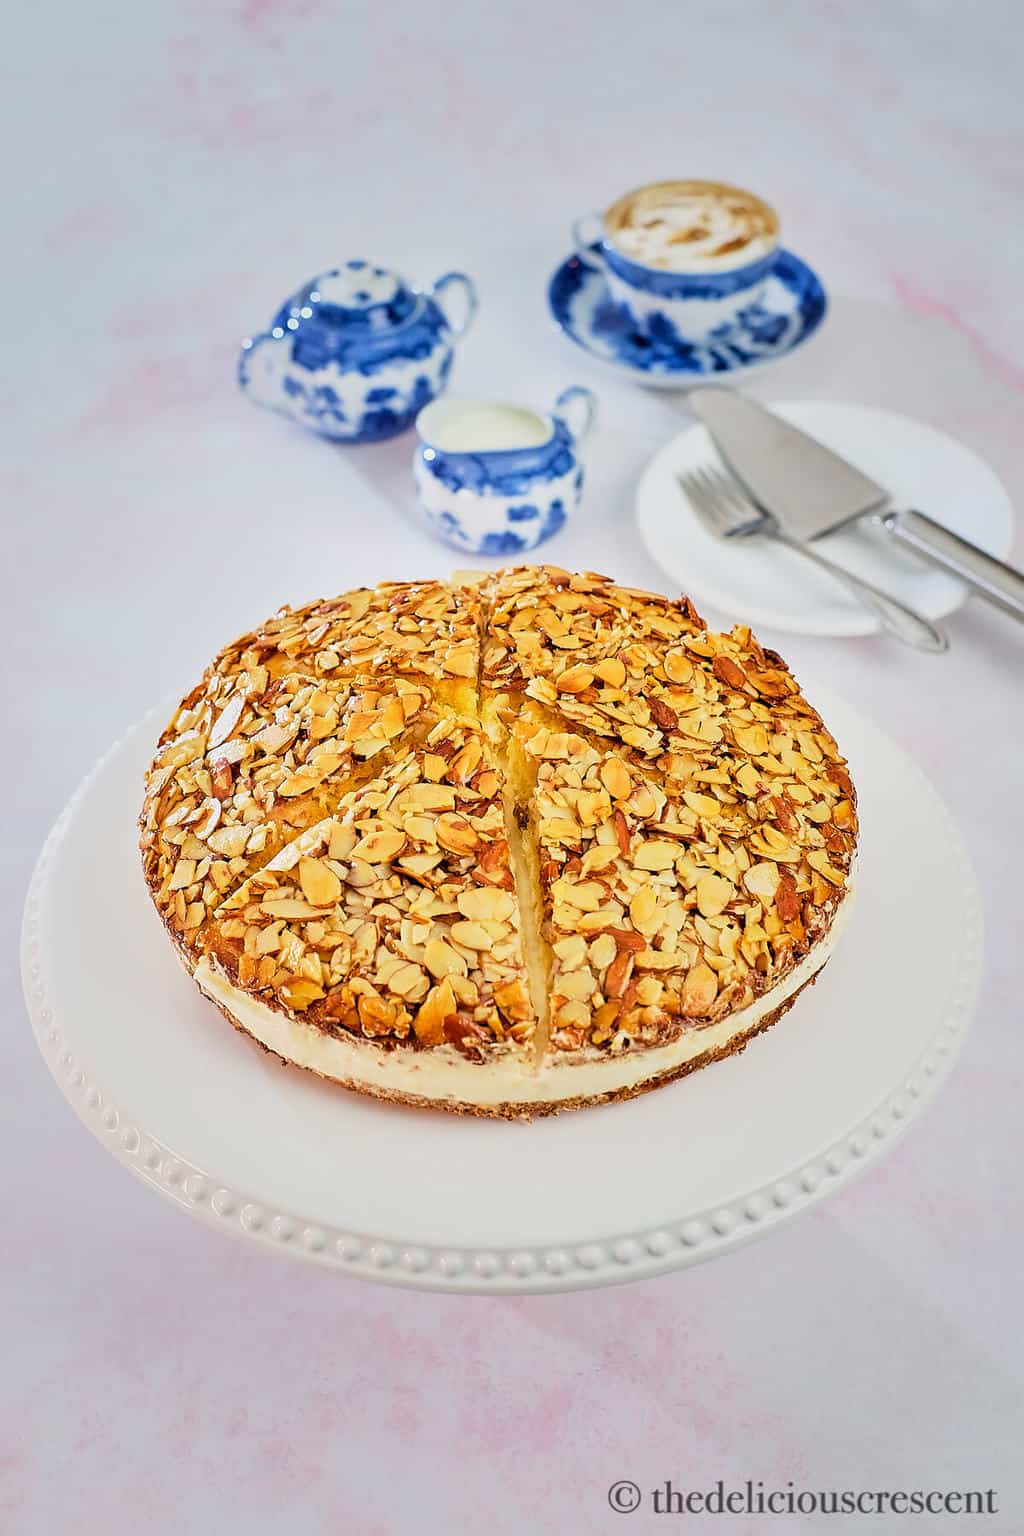 A classic German cake filled with custard and topped with caramelized honey almonds served on the table.